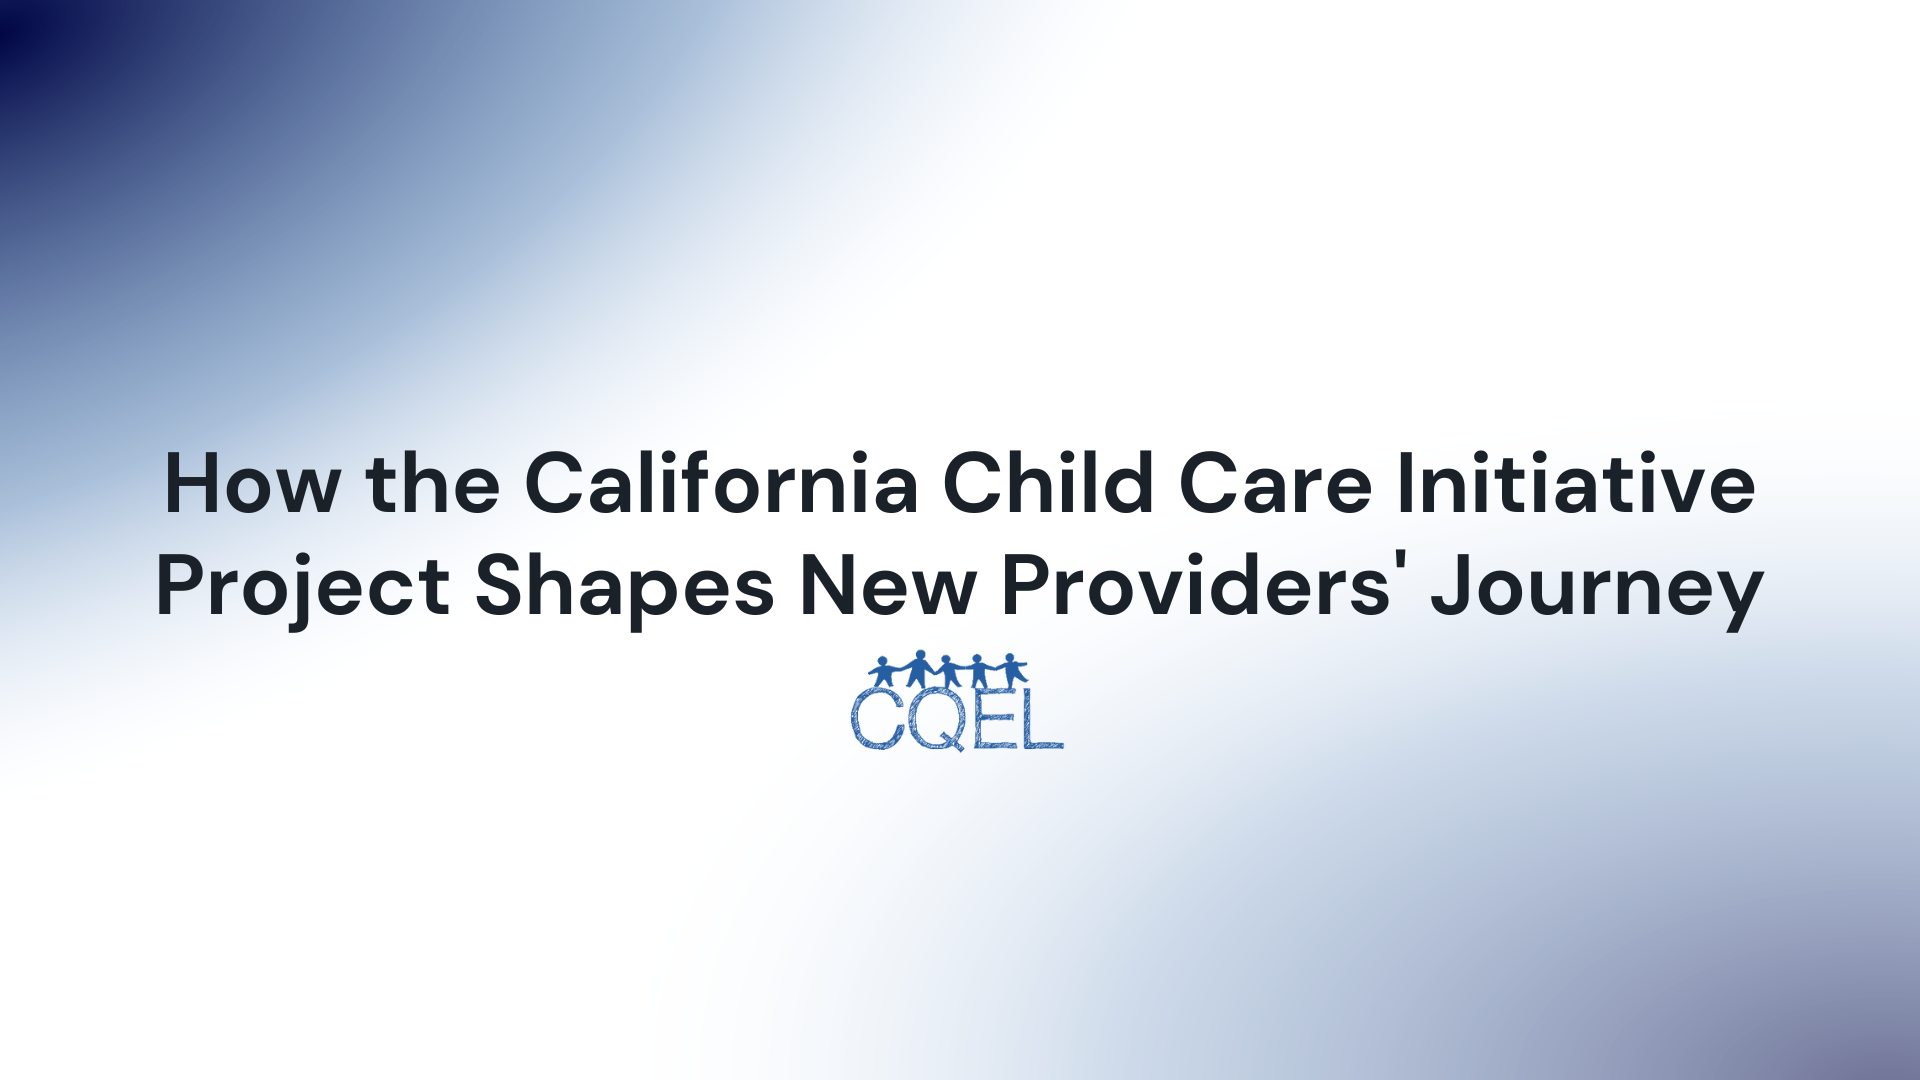 How the California Child Care Initiative Project Shapes New Providers' Journey